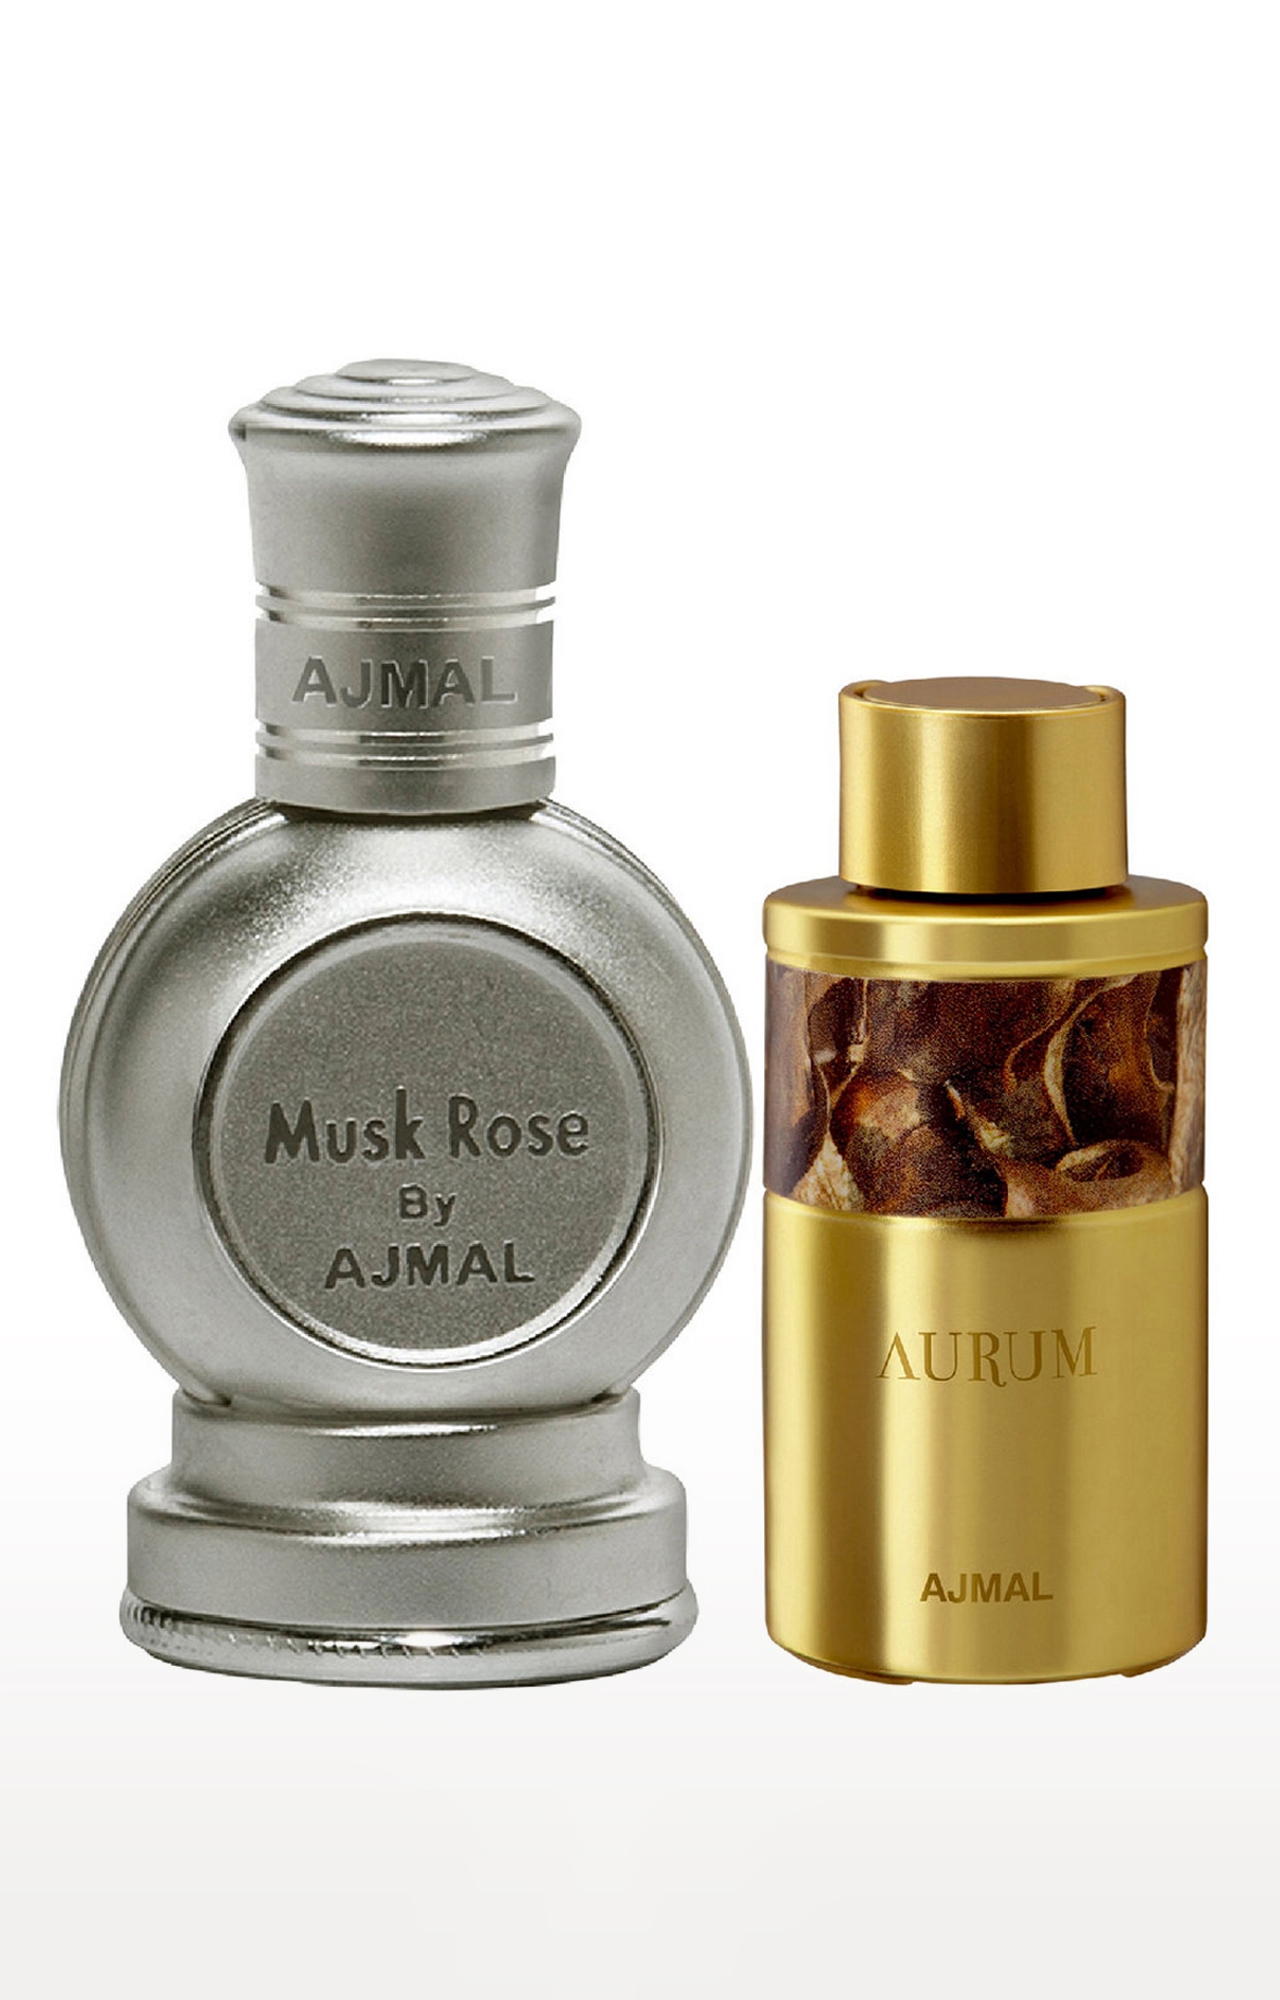 Ajmal Musk Rose Concentrated Perfume Oil Musky Alcohol-free Attar 12ml for Unisex and Aurum Concentrated Perfume Oil Alcohol-free Attar 10ml for Women